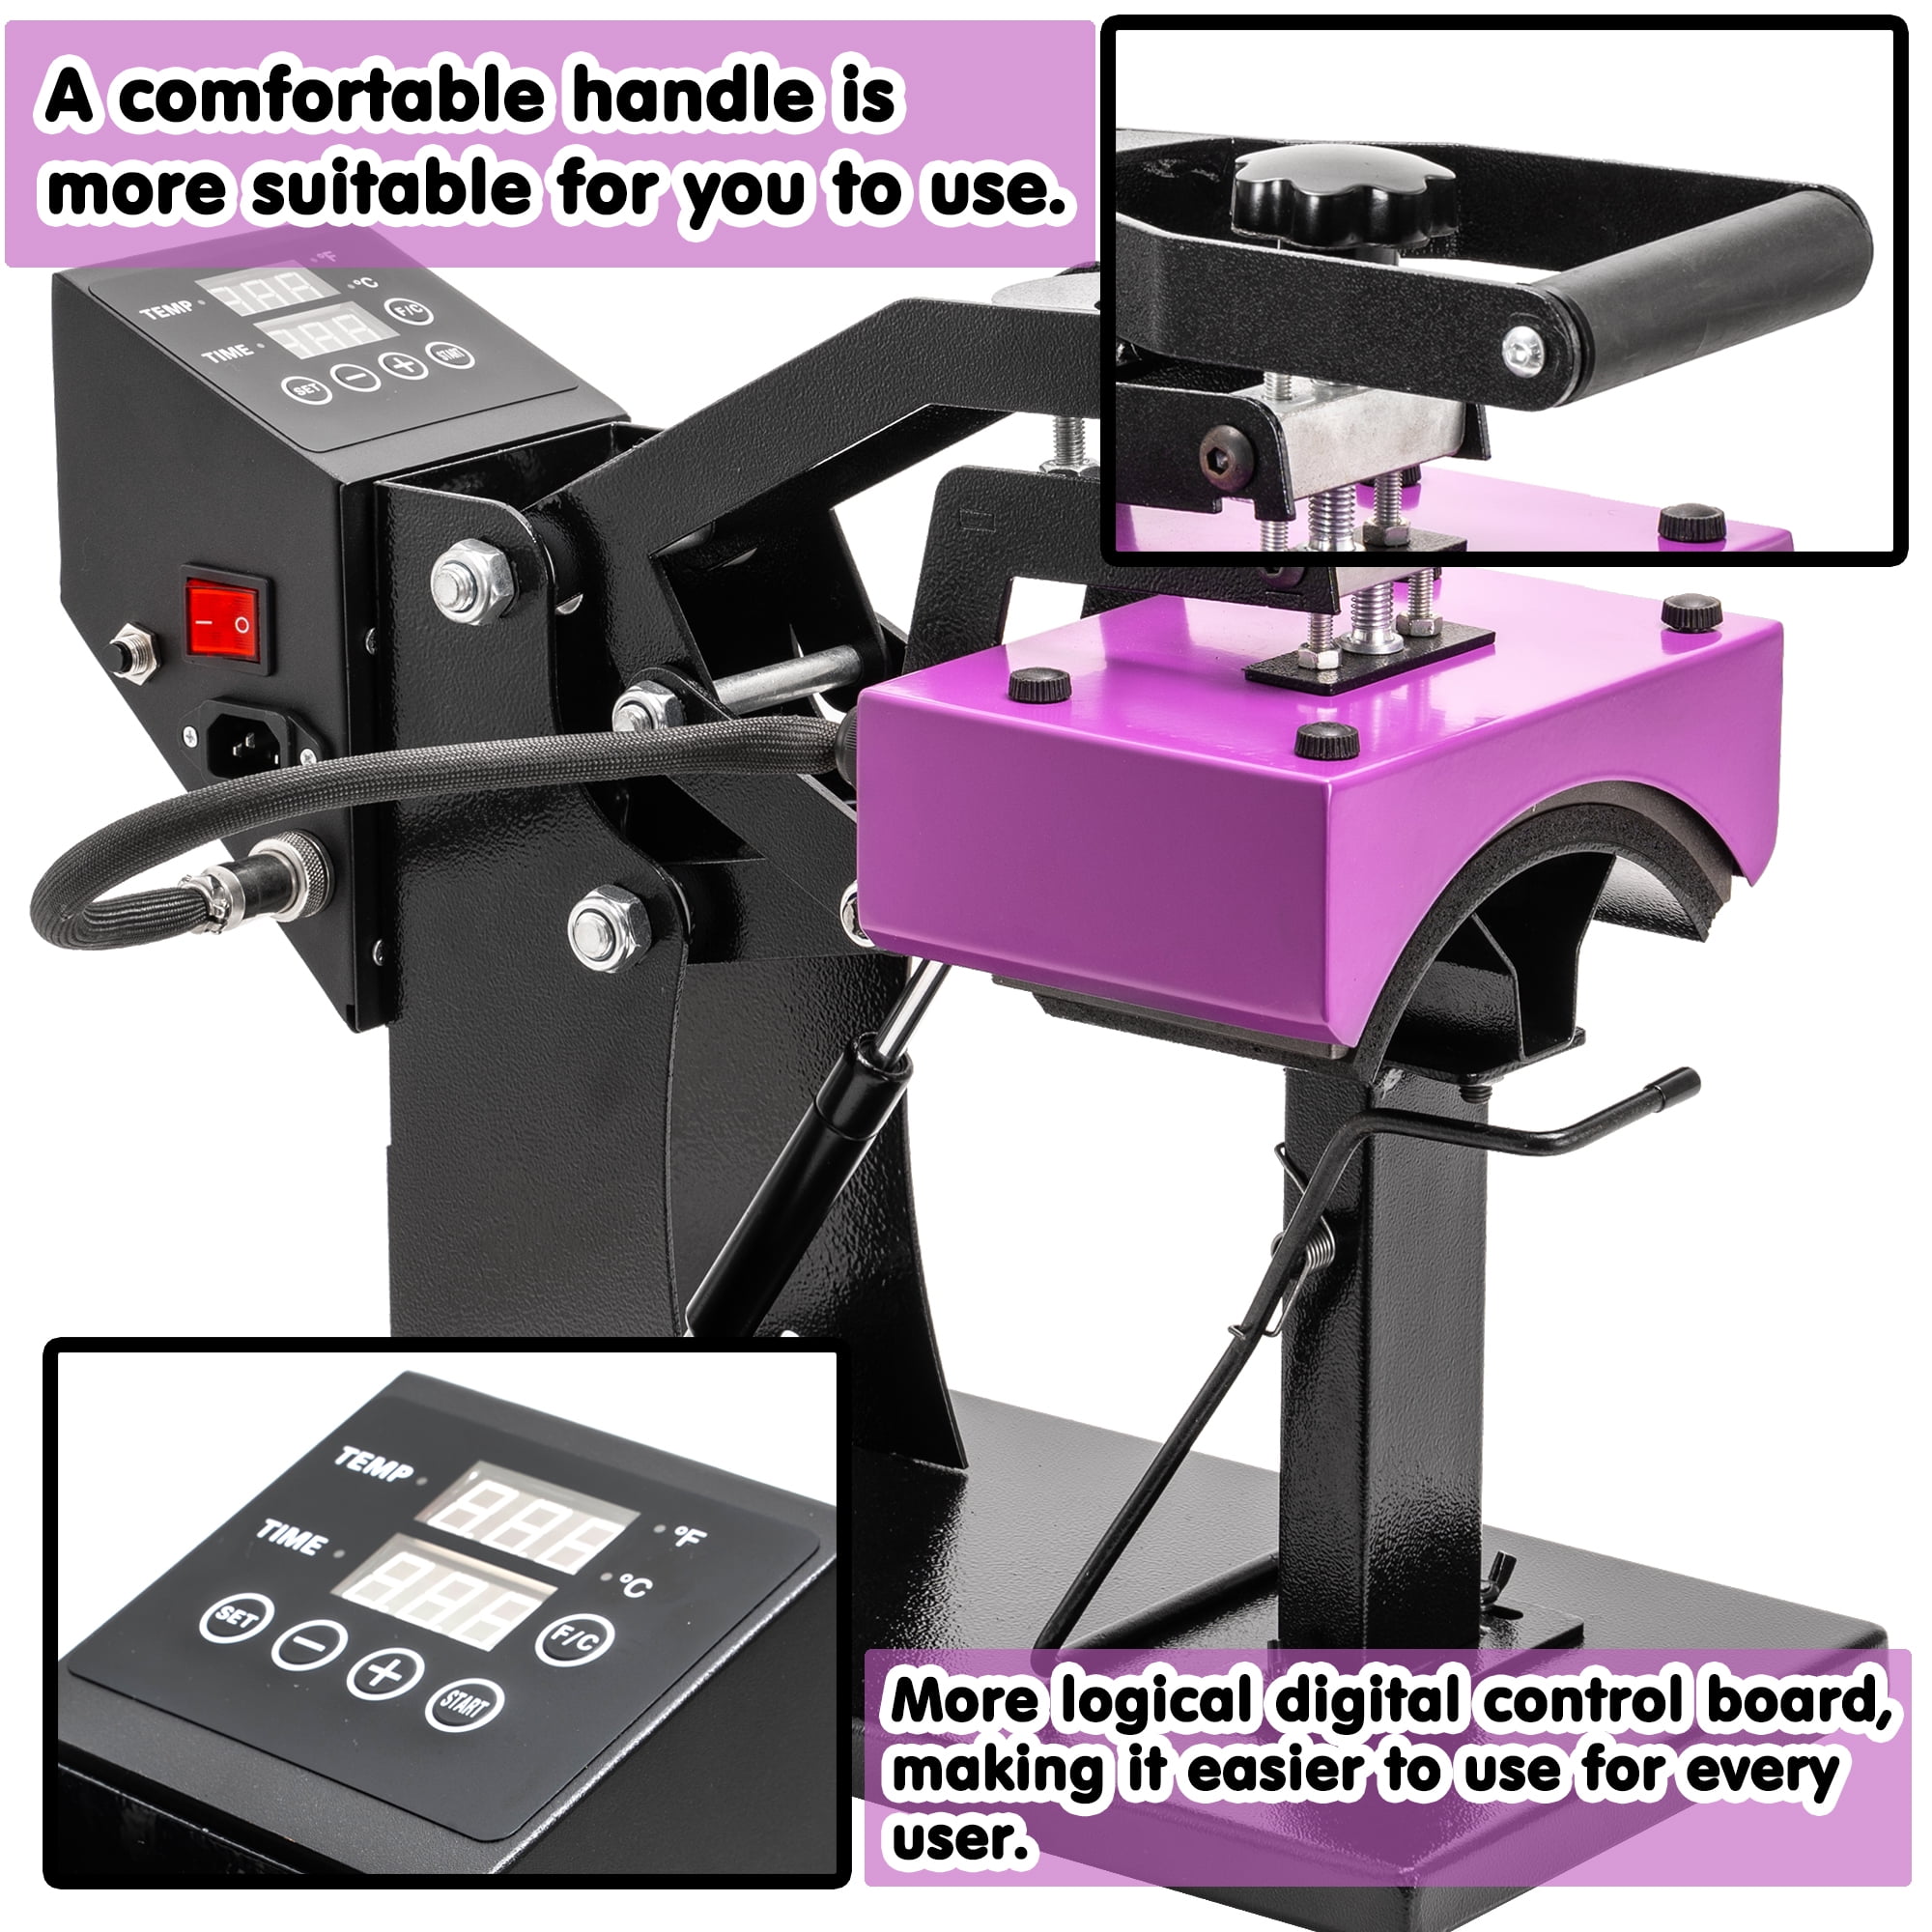  Goodcrafter Hat Press 6.3x3.3 Hat Heat Press Machine for  Caps,Curved,Ceramic-Coated Heat Plate, Easy Temperature Control with Safety  Base & Auto-Off Feature : Arts, Crafts & Sewing